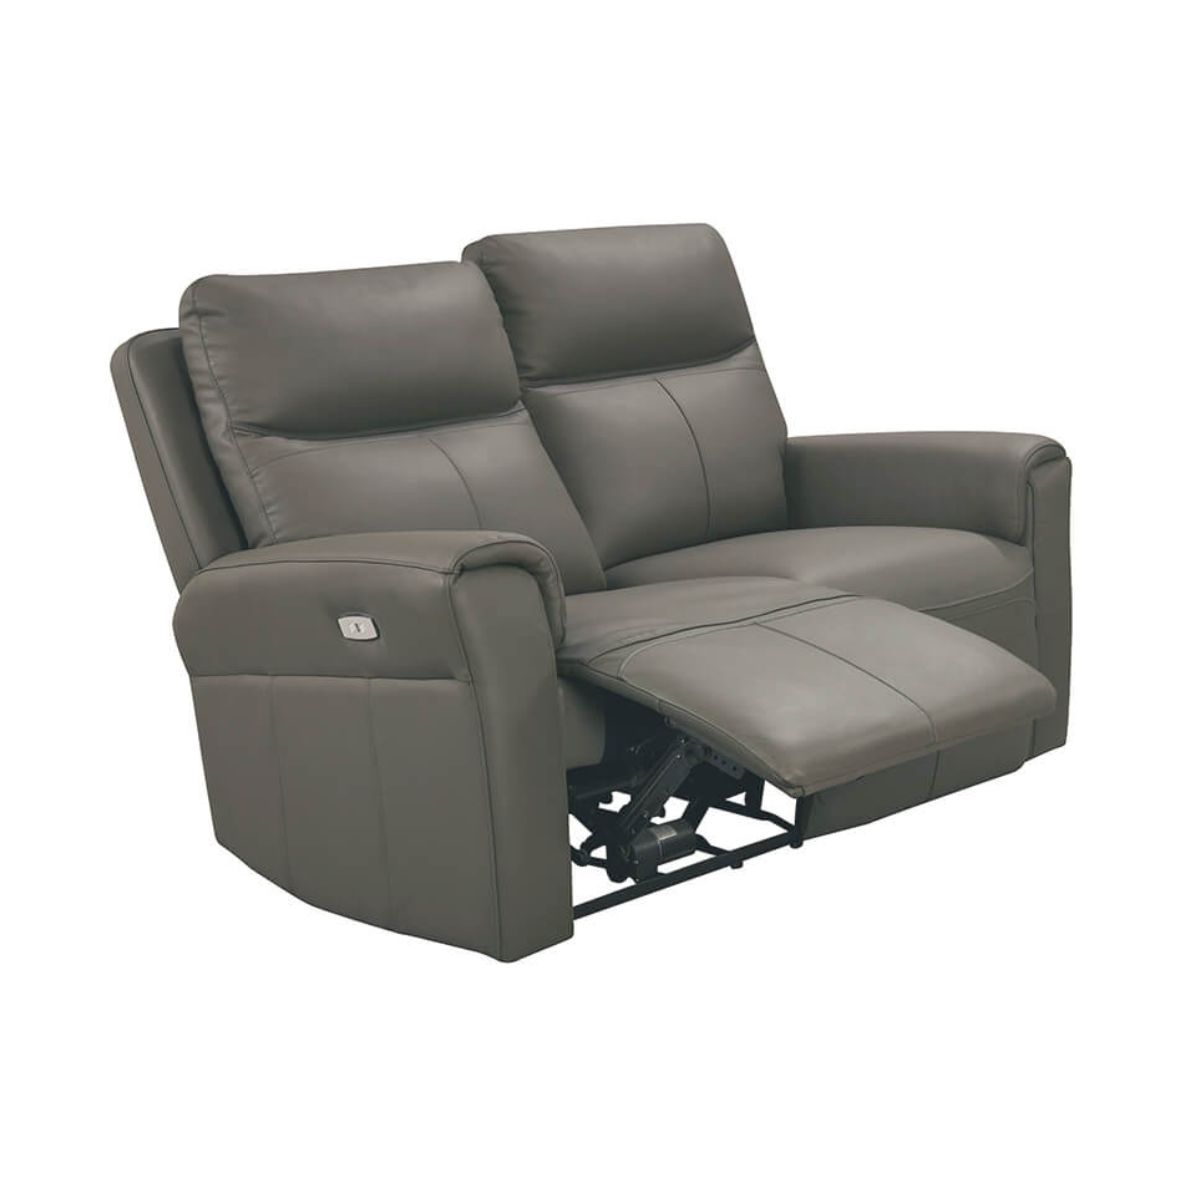 Rosslare Leather 2 Seater Electric Recliner Grey - 2